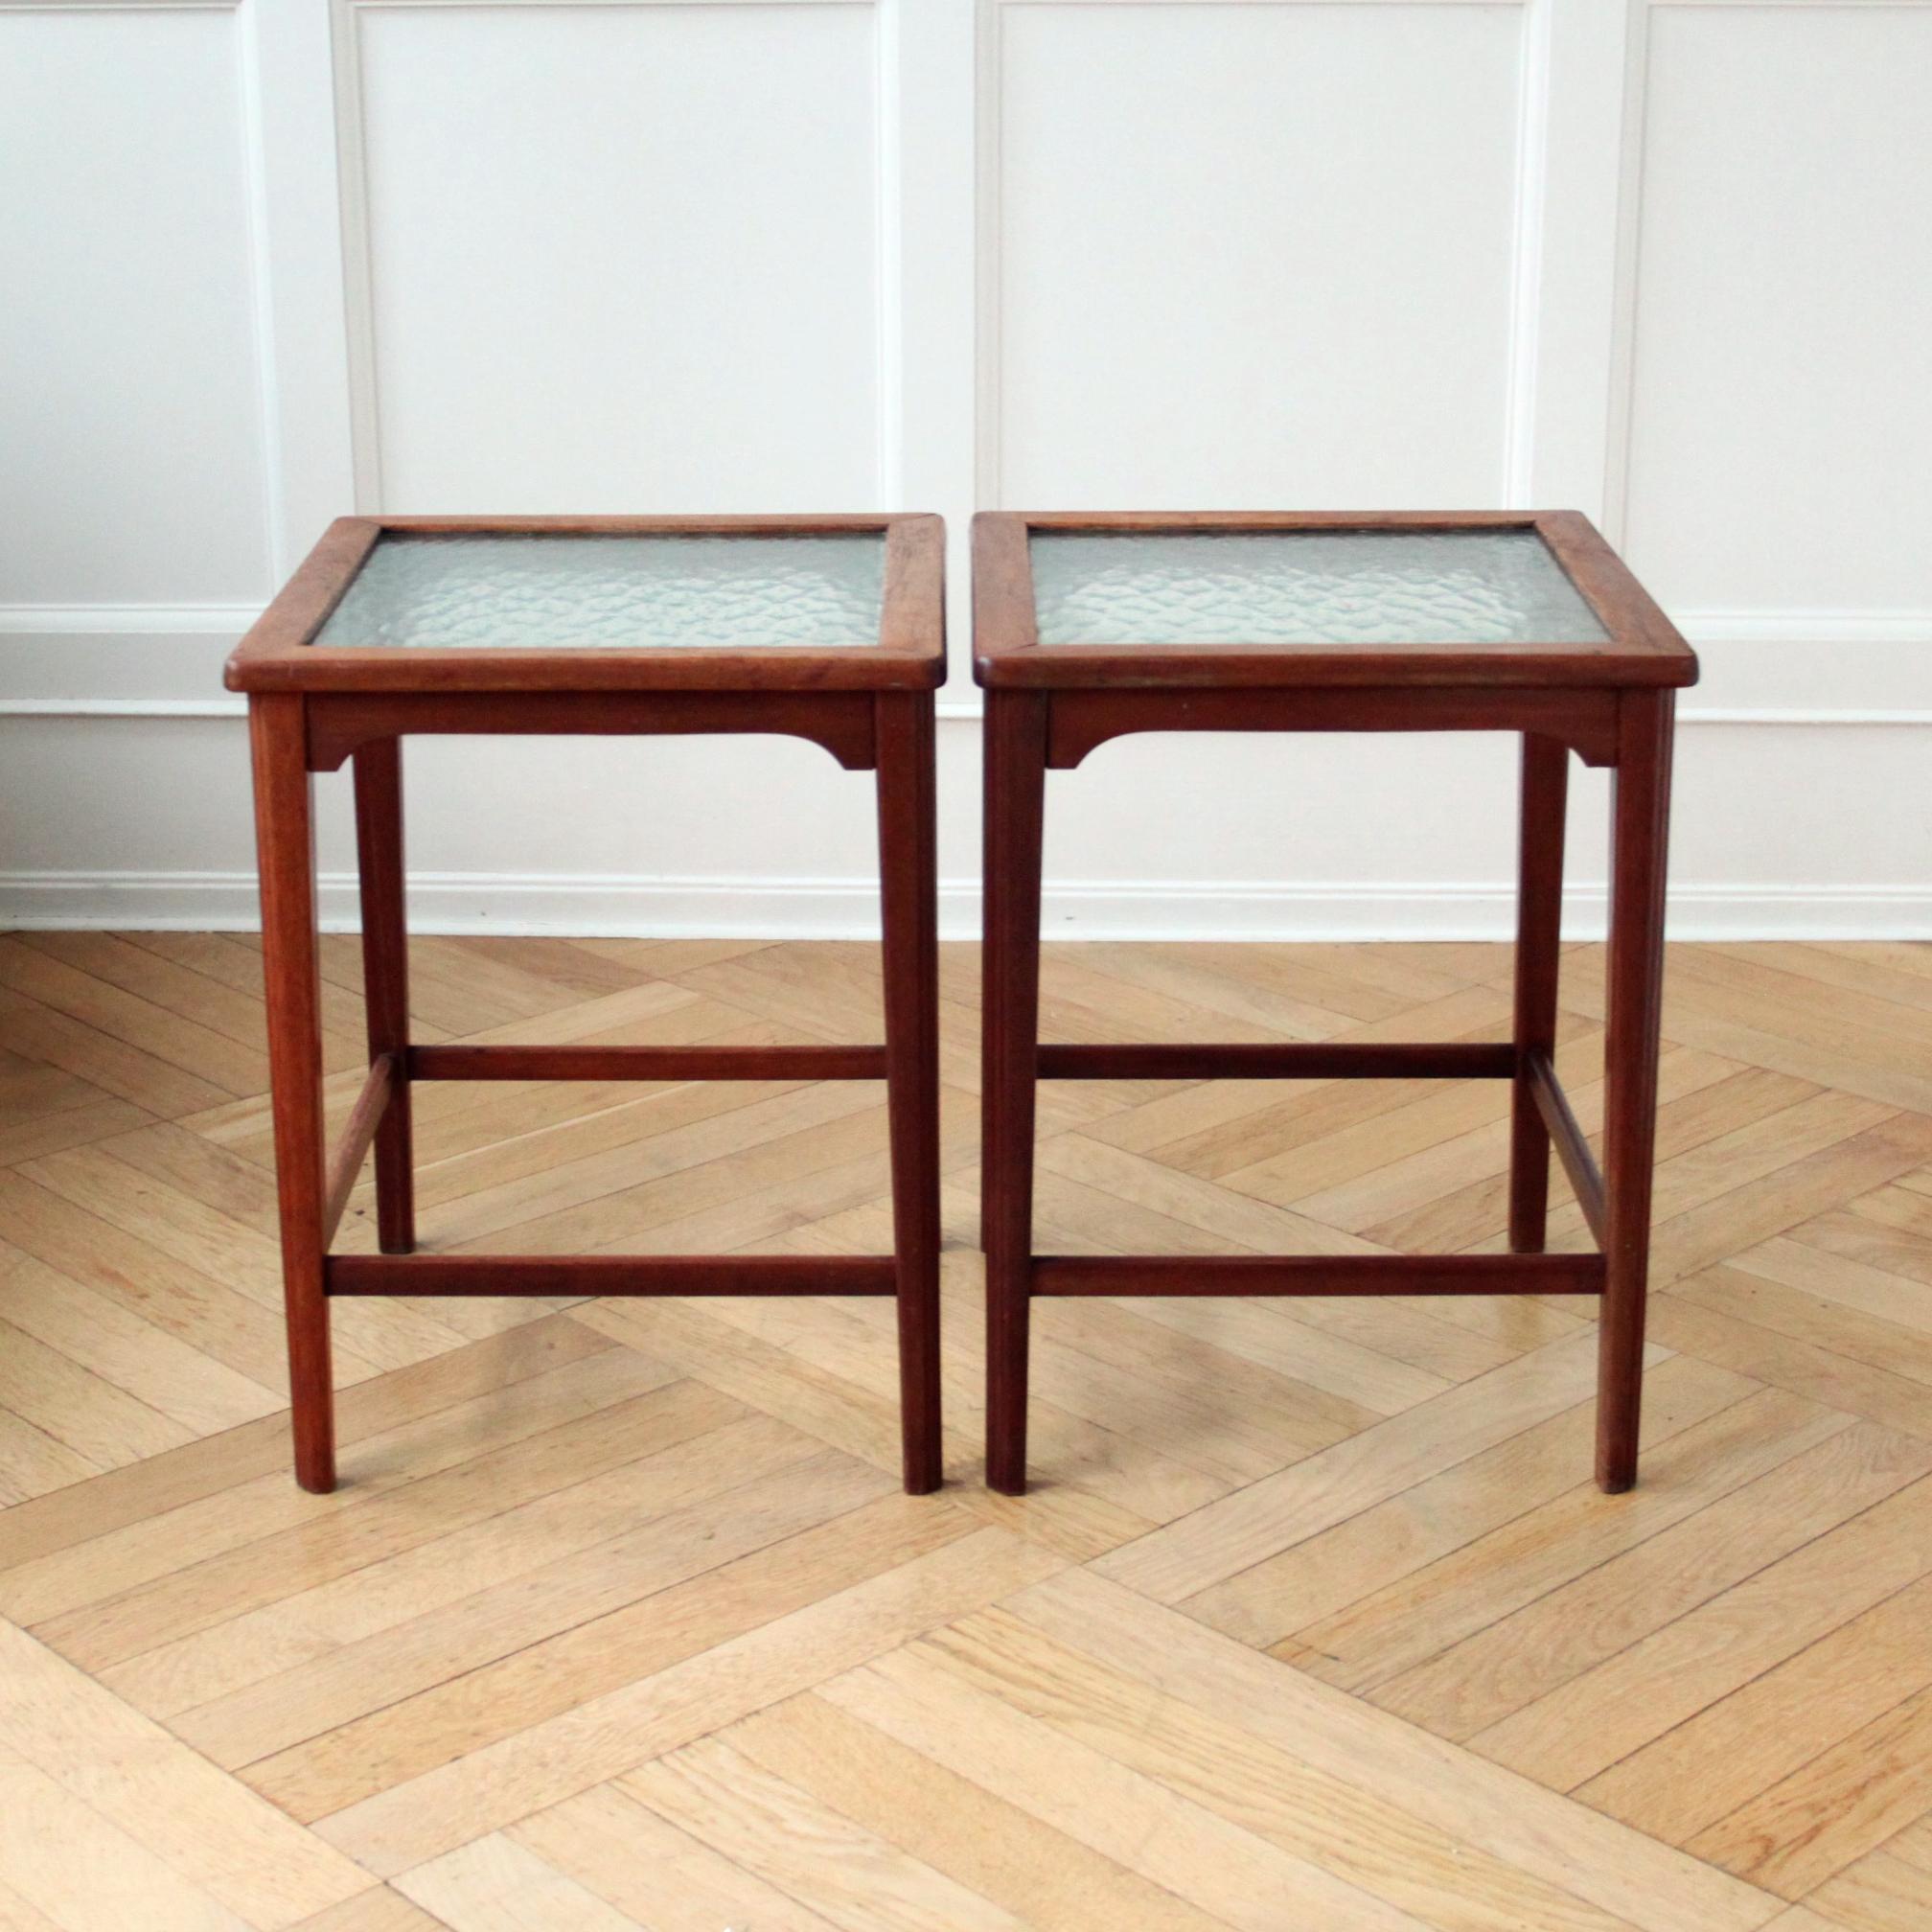 Scandinavian Modern Design

A beautiful pair of Scandinavian Modern sidetables attributed to designer and cabinetmaker Jacob Kjær, Denmark 1940s. 

The tables are square and made of mahogany with profiled tapered legs with fine decorative glass top,